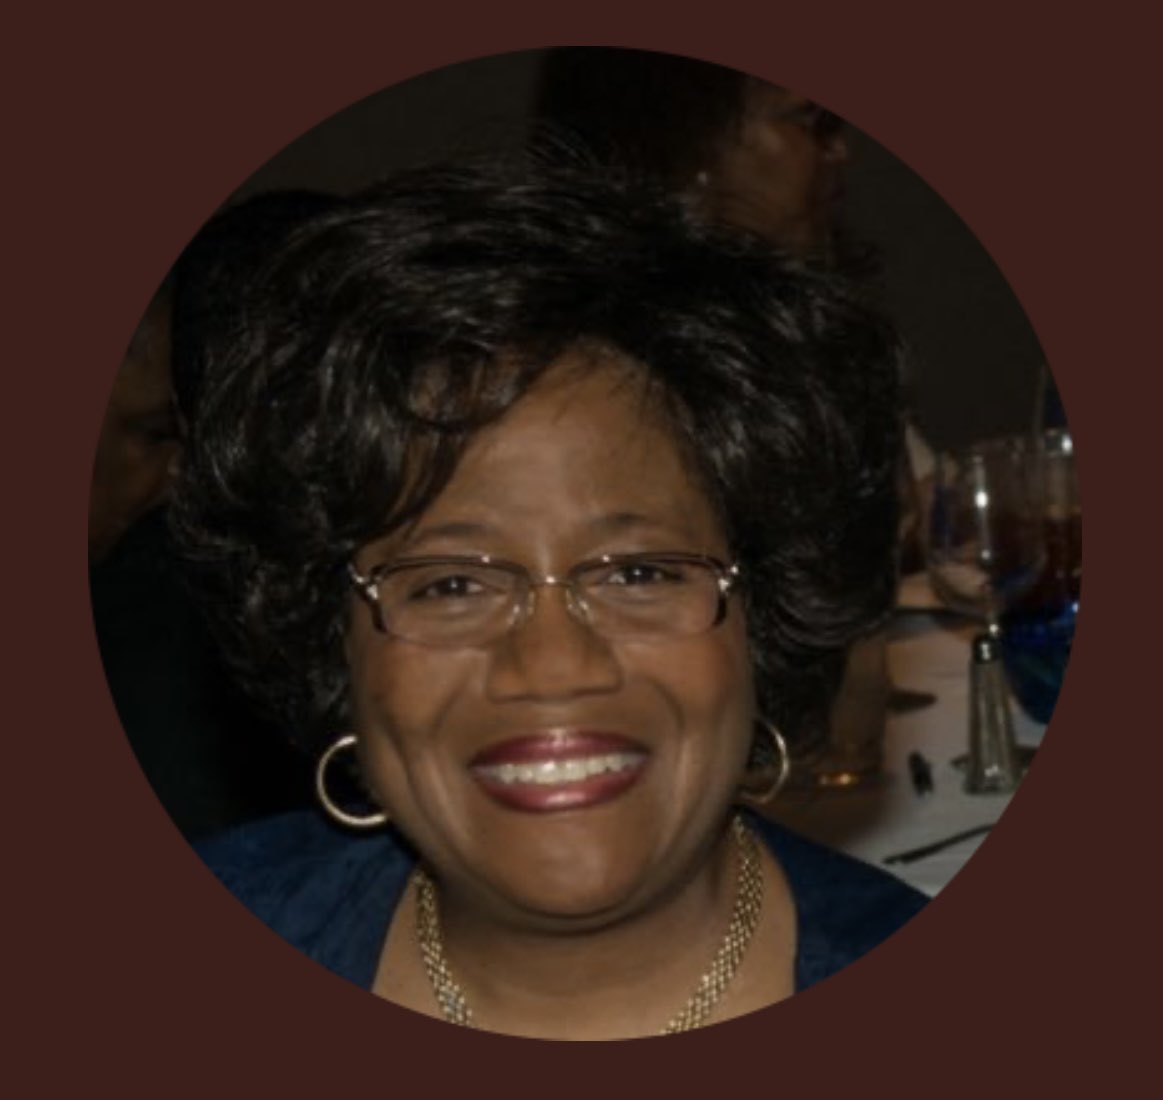 Dr. Betty Cobbs IS Black History in the making. Evergreen Middle School is proud of her service to students in Everett. We salute her! @BettyJCobbs1 @EPS_EvergreenMS @EverettSchools #educator #BlackHerstoryMonth